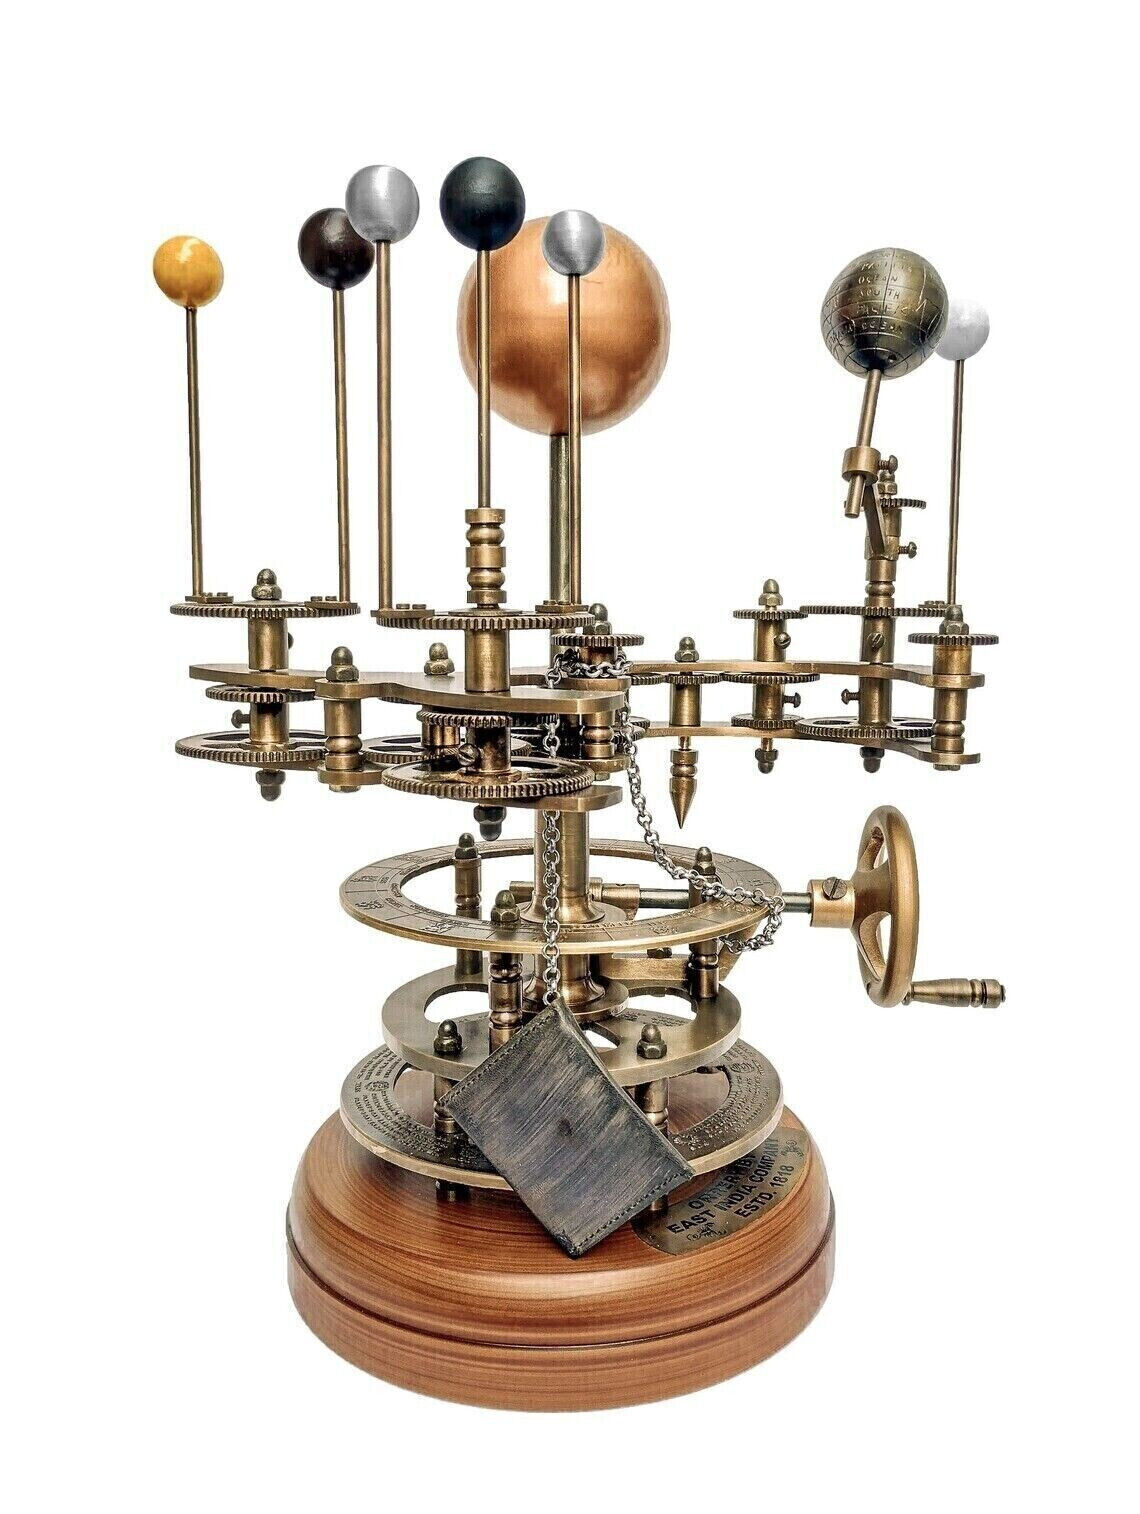 The Orbital Masterpiece - A Breathtaking Orrery of the Inner Planets